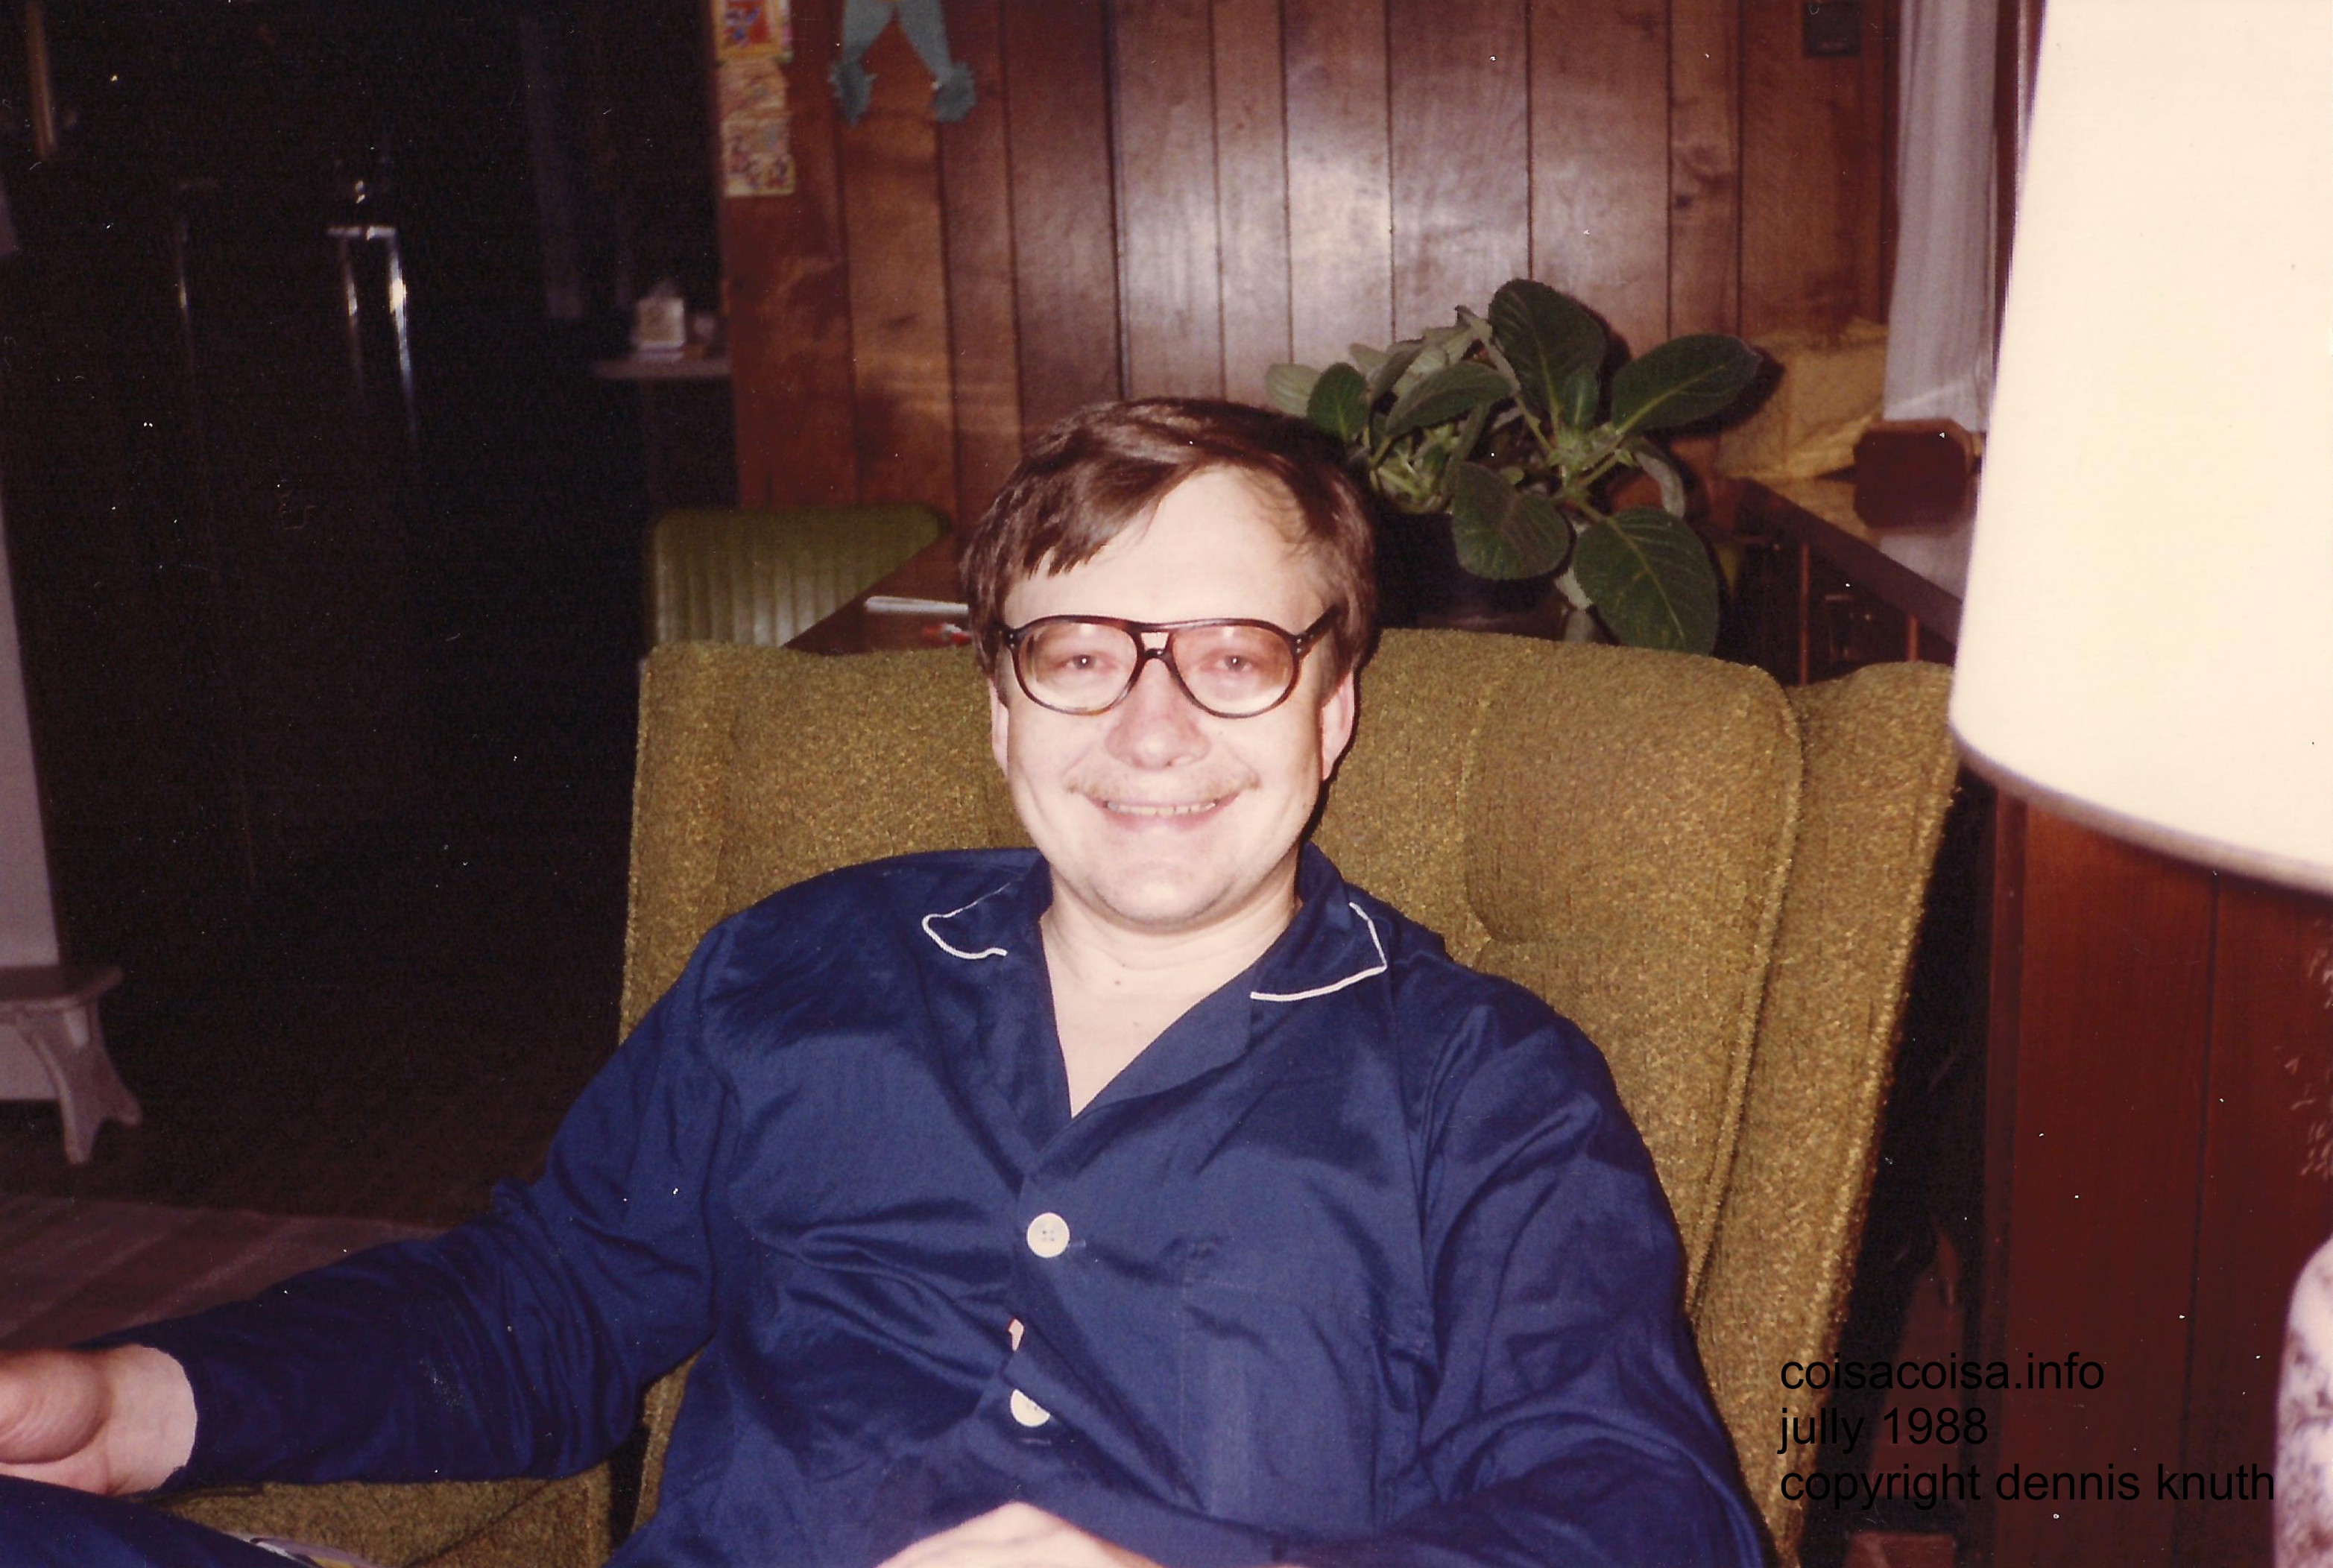 Dennis Knuth in pajamas in 1988